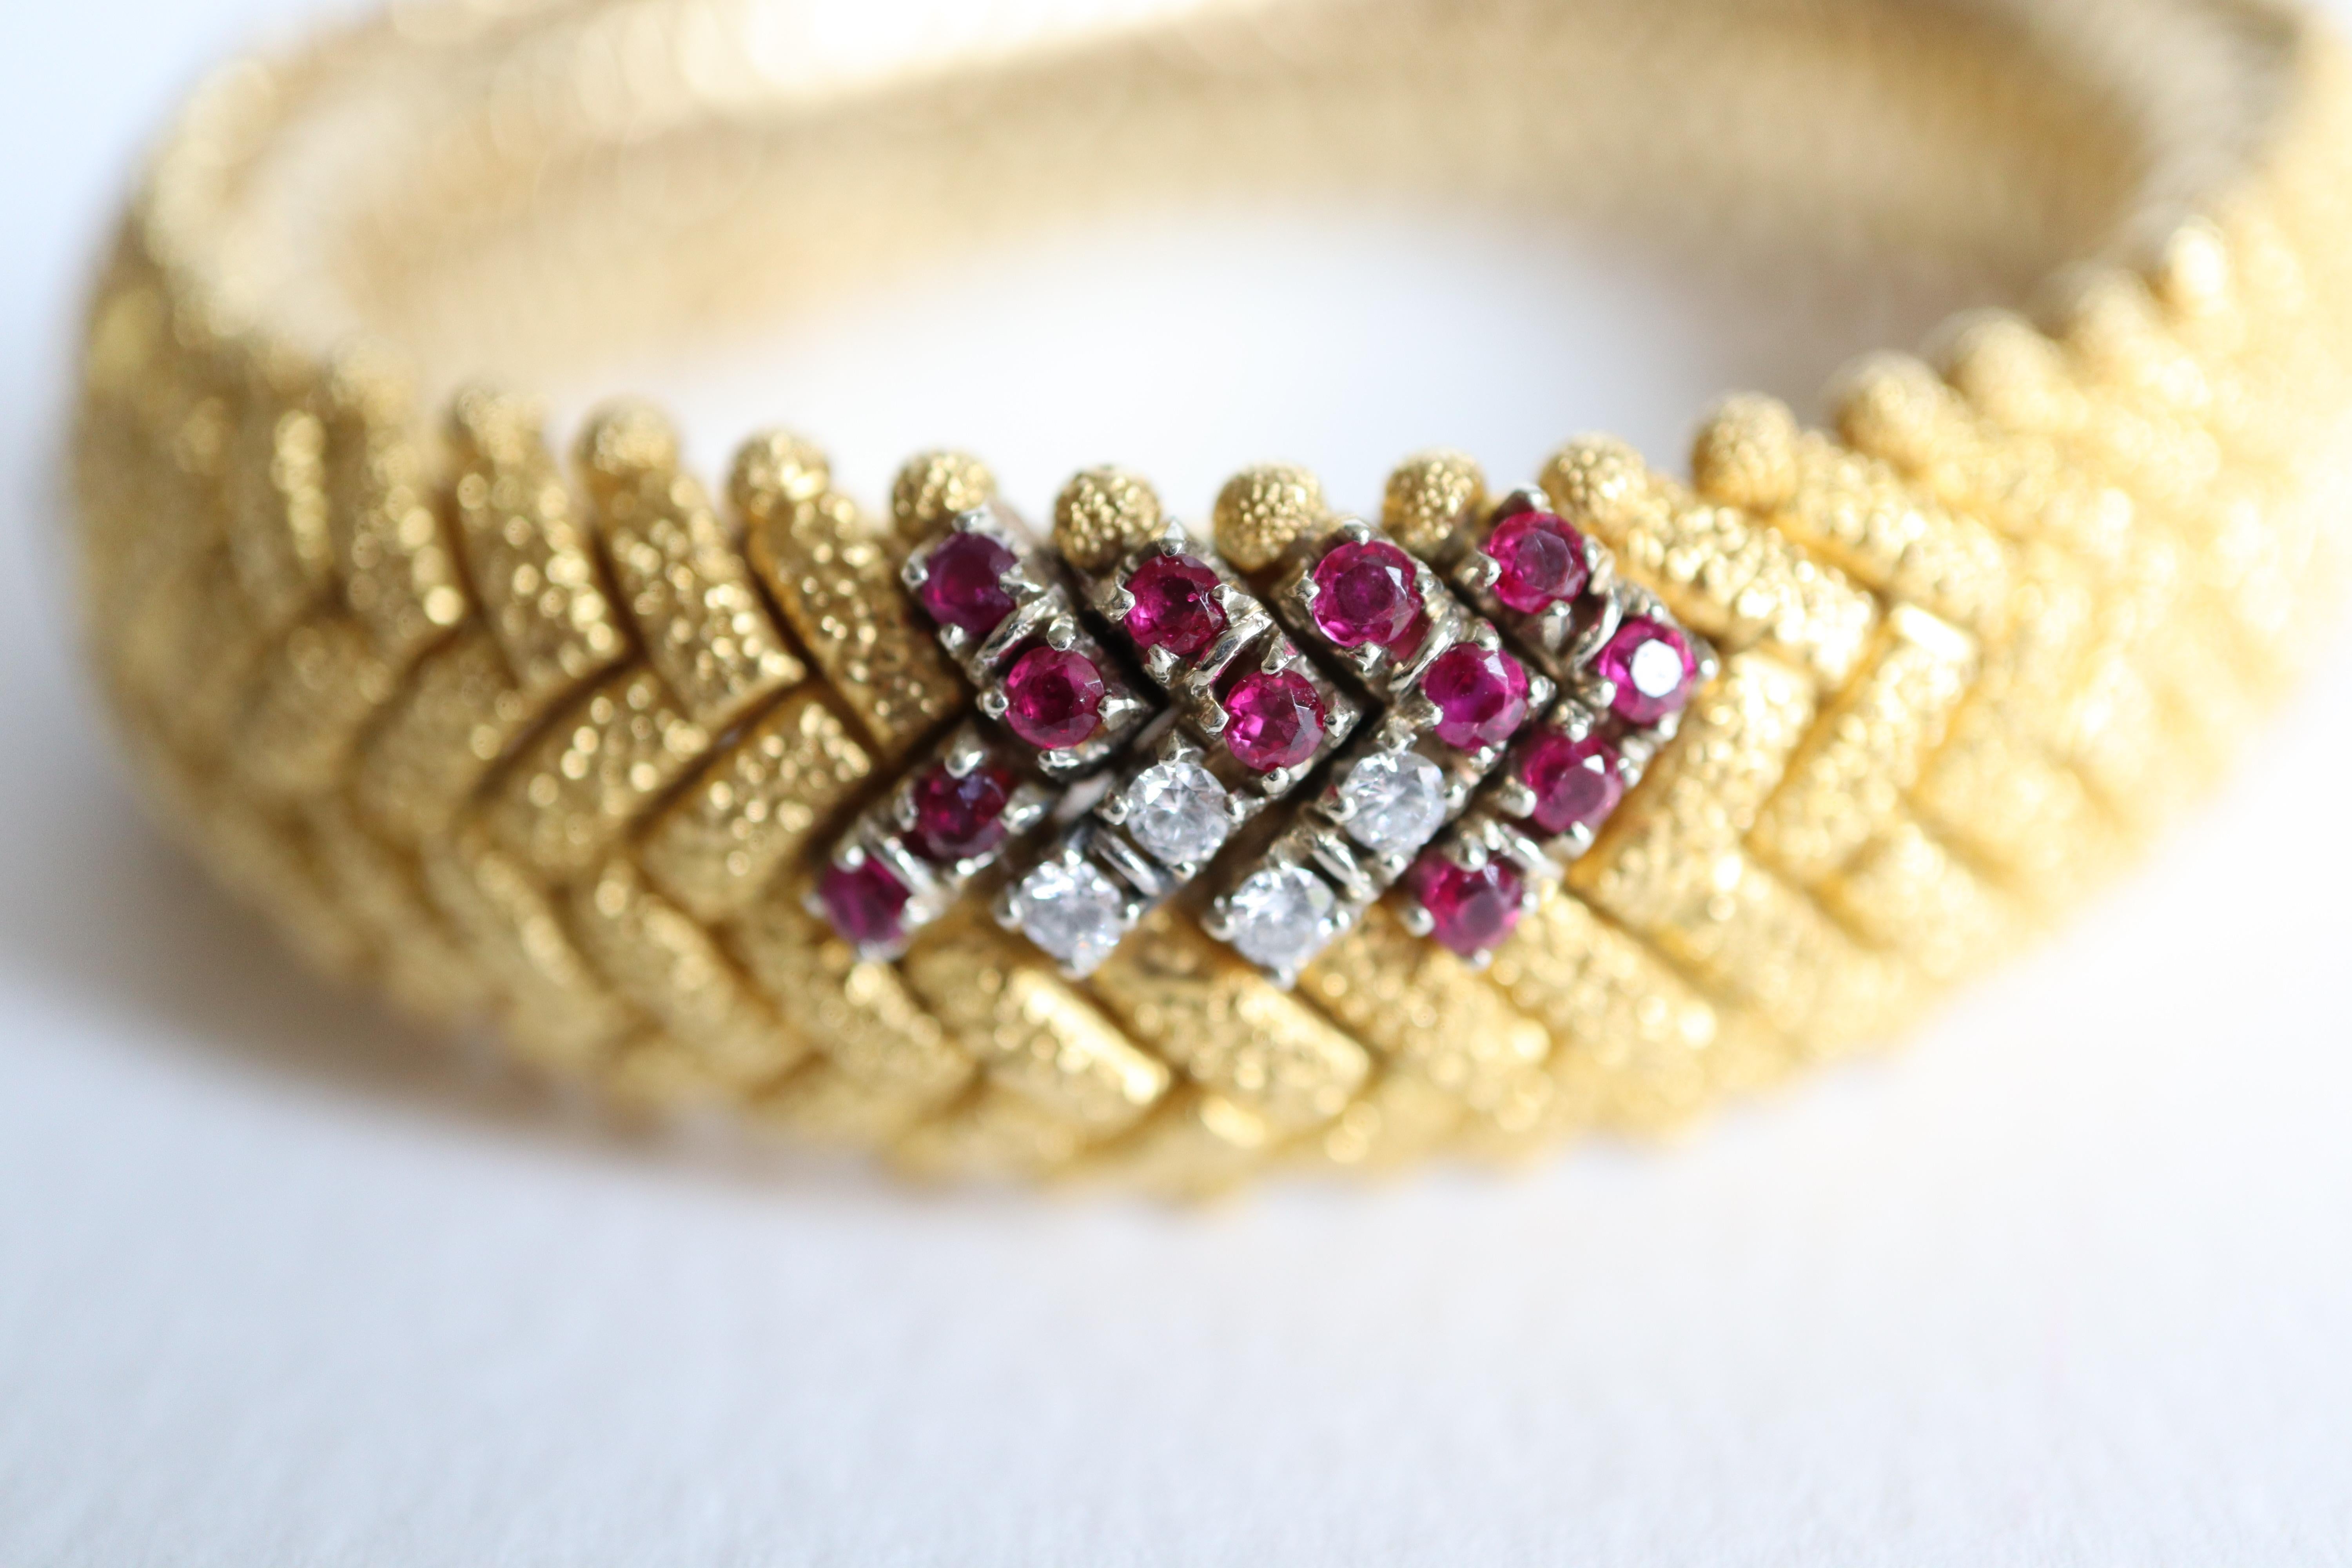 Bracelet circa 1960 in hammered Satin-brushed 18-karat yellow Gold and Ruby, flexible articulated Snake Link with geometric patterns including Four V-shaped Patterns setting twelve Rubies each, for one Carat, that is 4 carats of rubies for the 4